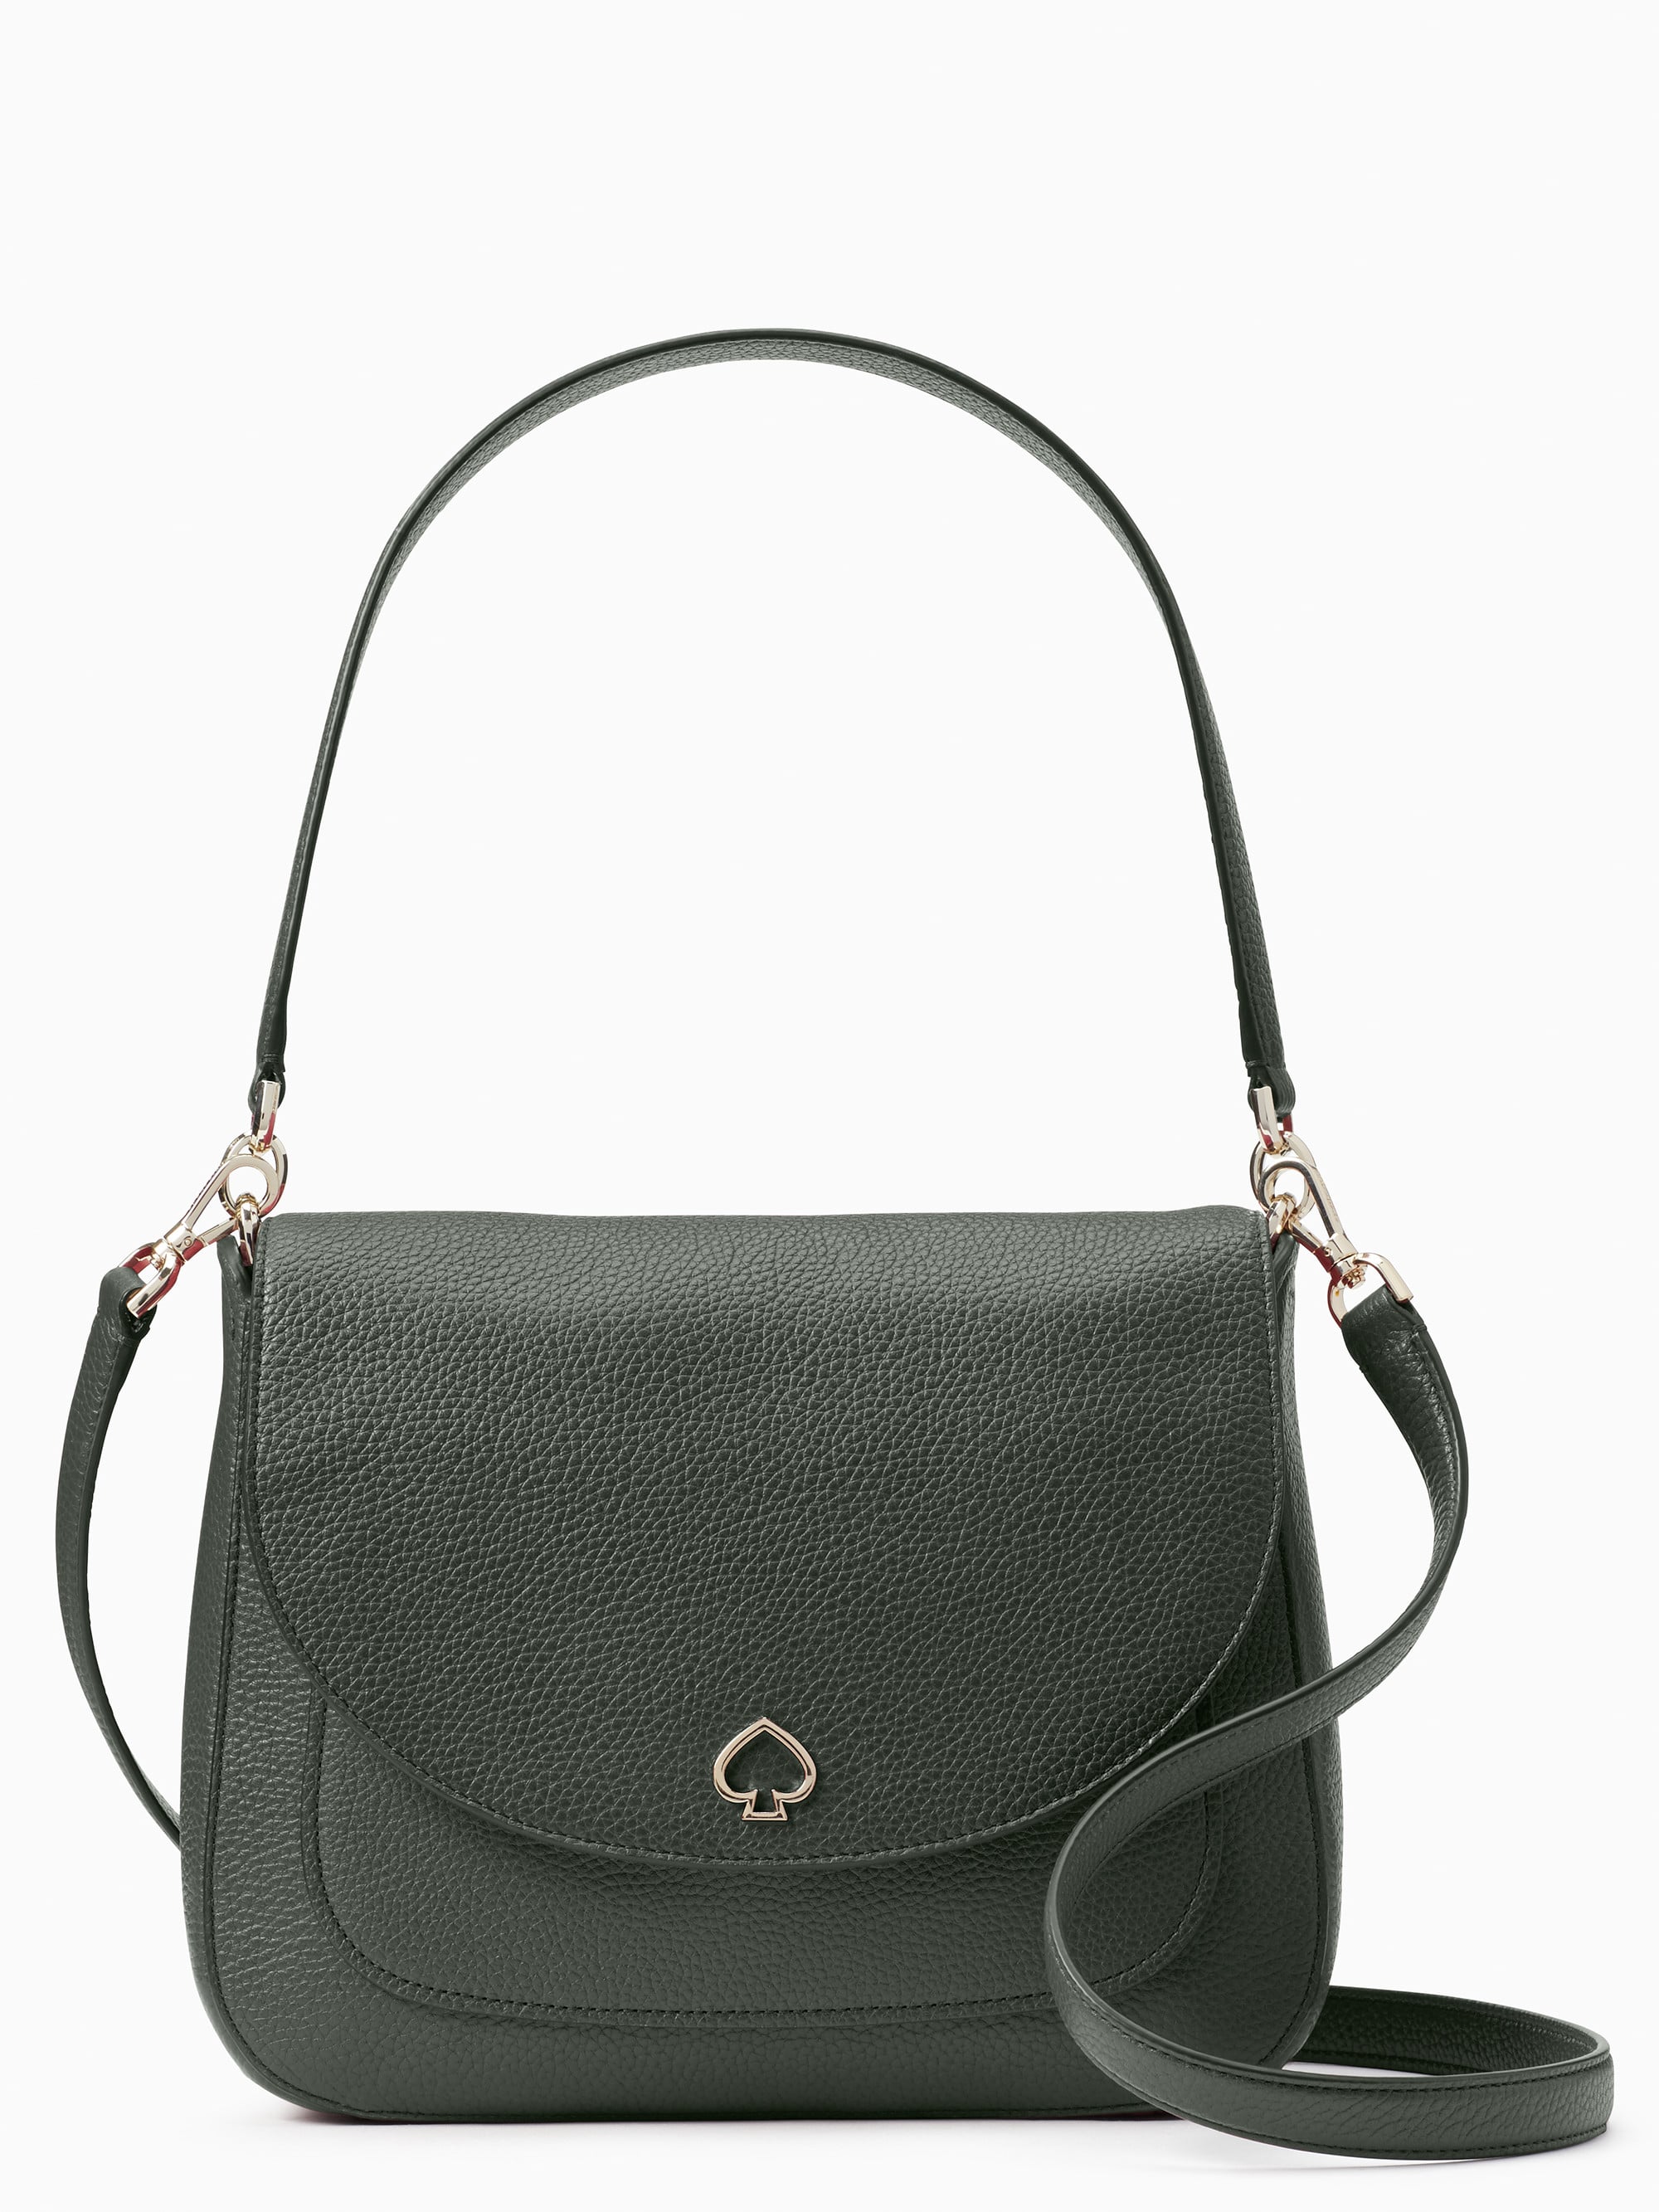 A Shoulder and Crossbody Bag: Kate Spade Kailee Medium Flap Shoulder Bag |  Shhh! Kate Spade Is Having a Secret Sale With Discounts You Have to See to  Believe | POPSUGAR Fashion